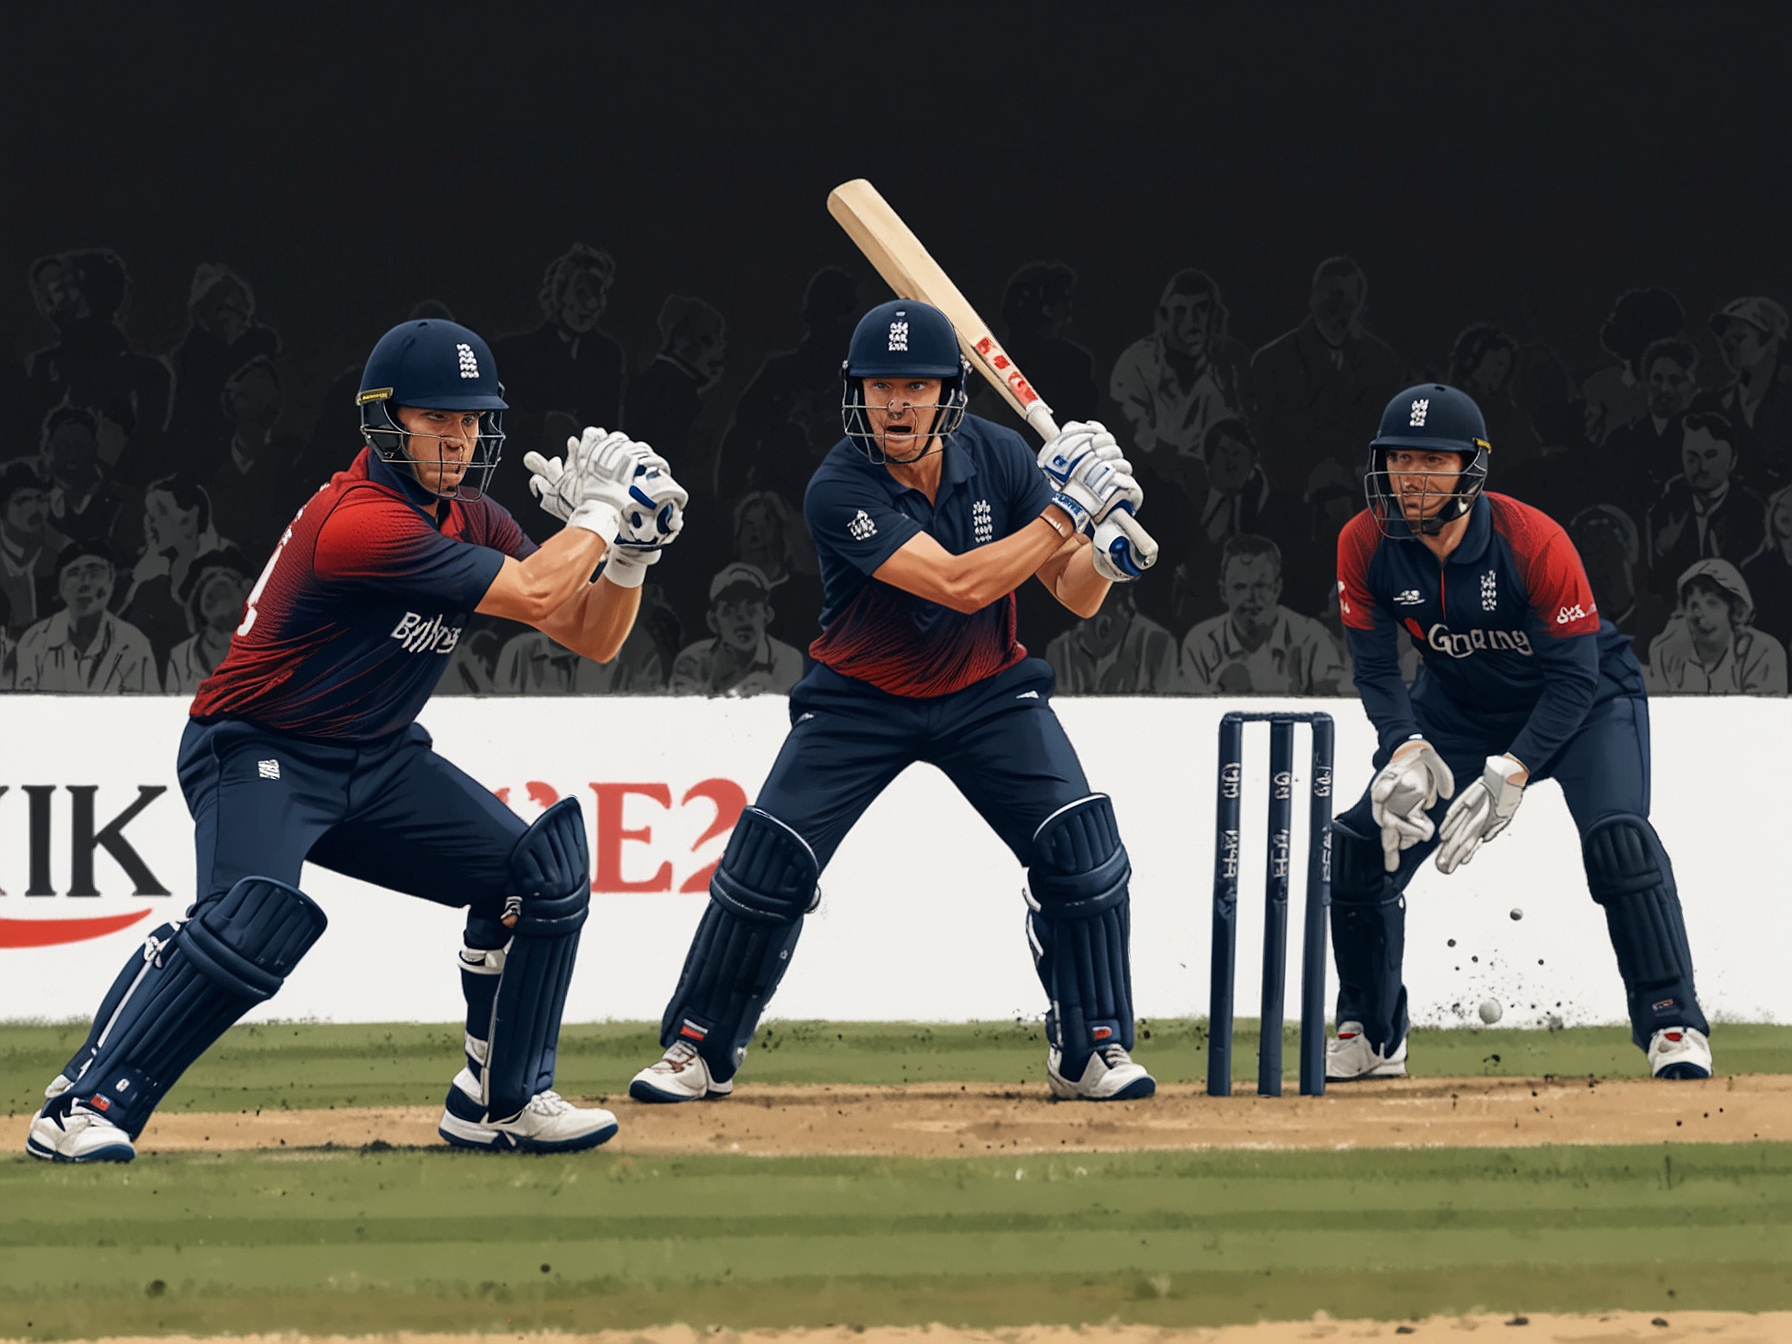 An intense moment from the ENG vs USA match in the ICC T20 World Cup 2024, showcasing England's star player Jos Buttler hitting a powerful shot while USA's fielders are in action.